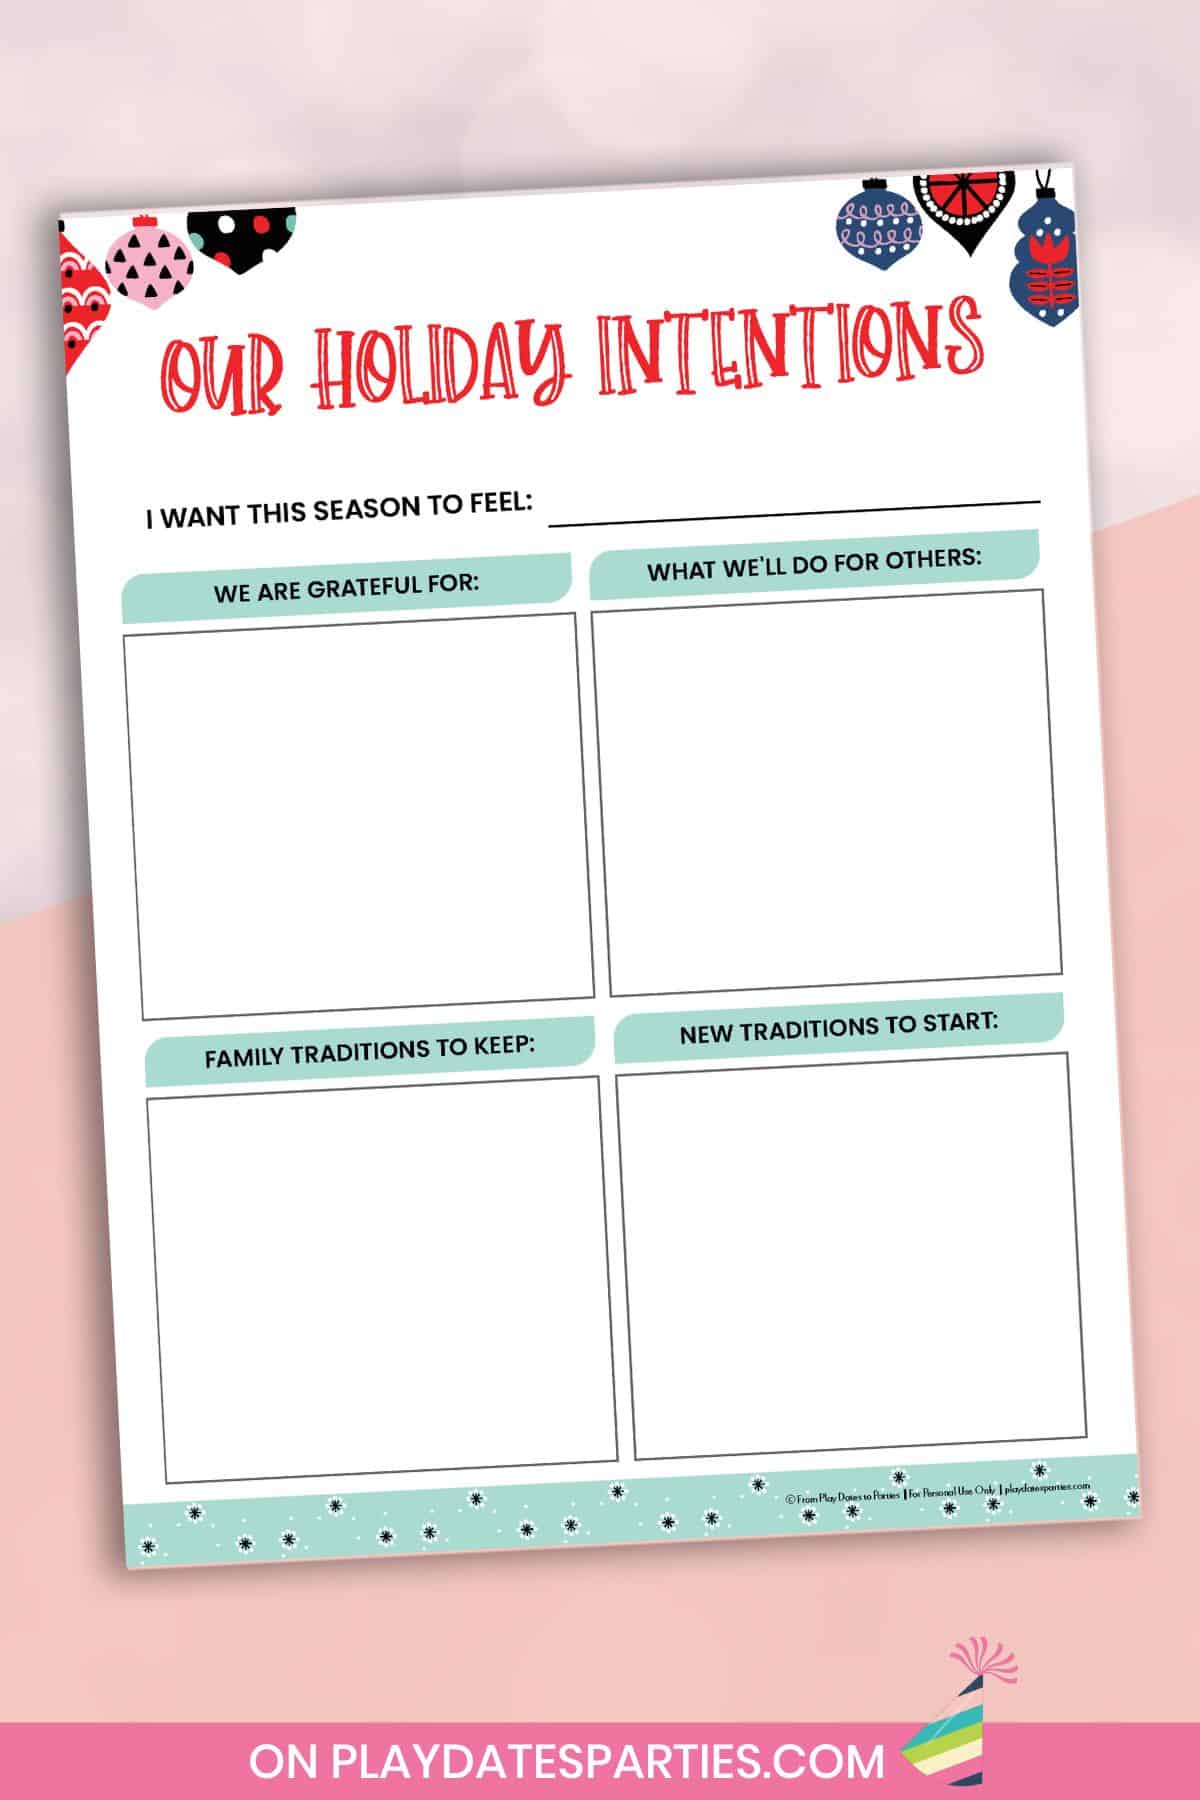 Printable holiday intentions guide on a pink background.